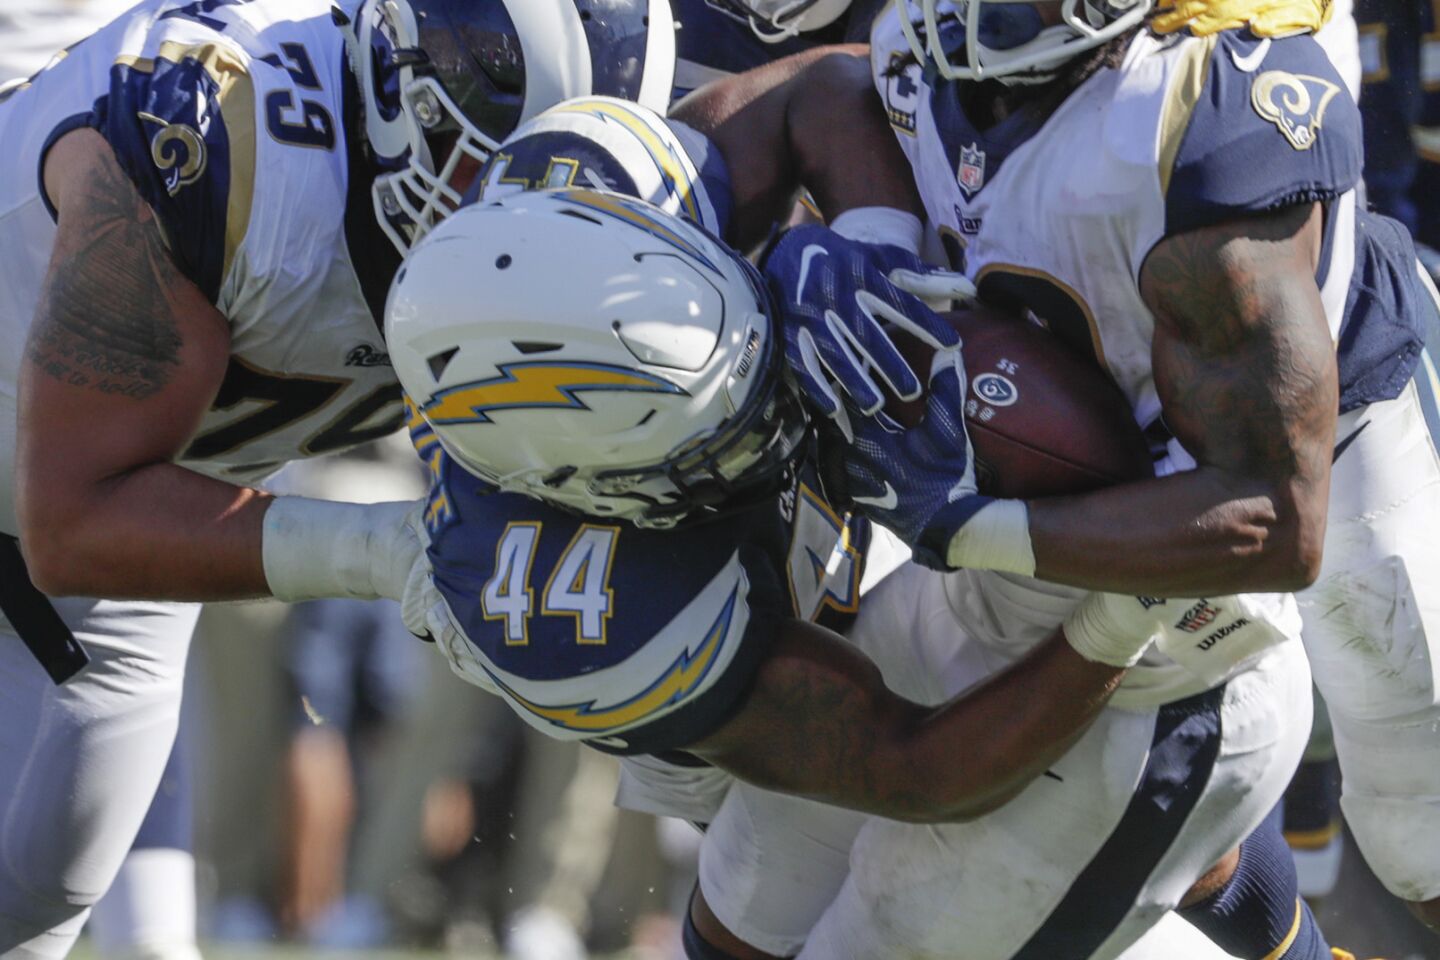 5 things we learned from LA Rams 13-6 loss to the Chargers on